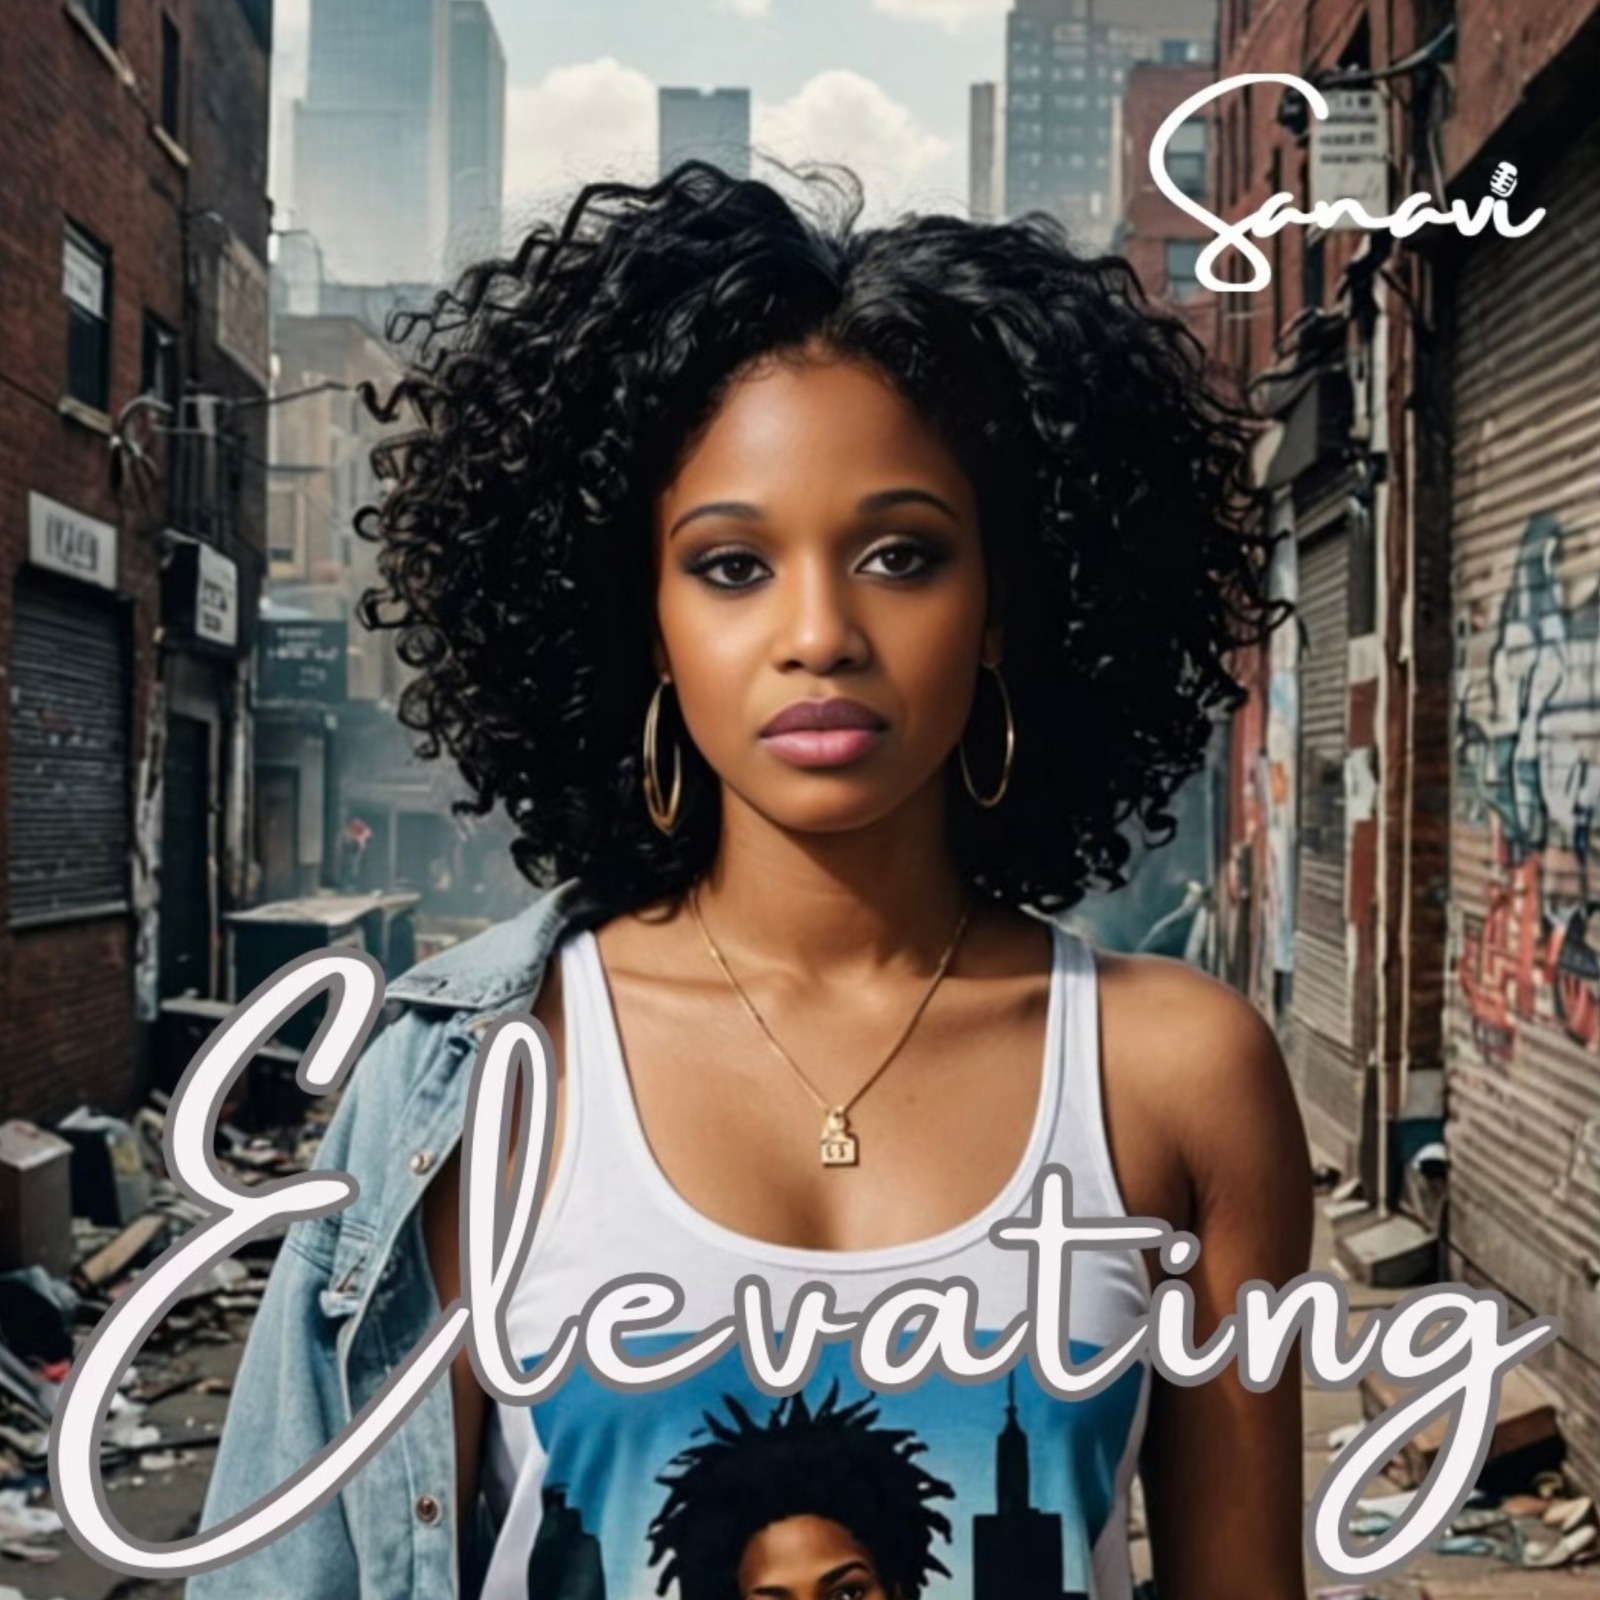 Sanavi Unveils Infectious Afrobeat Anthem "Elevating" – A Musical Journey of Self-Empowerment and Bliss